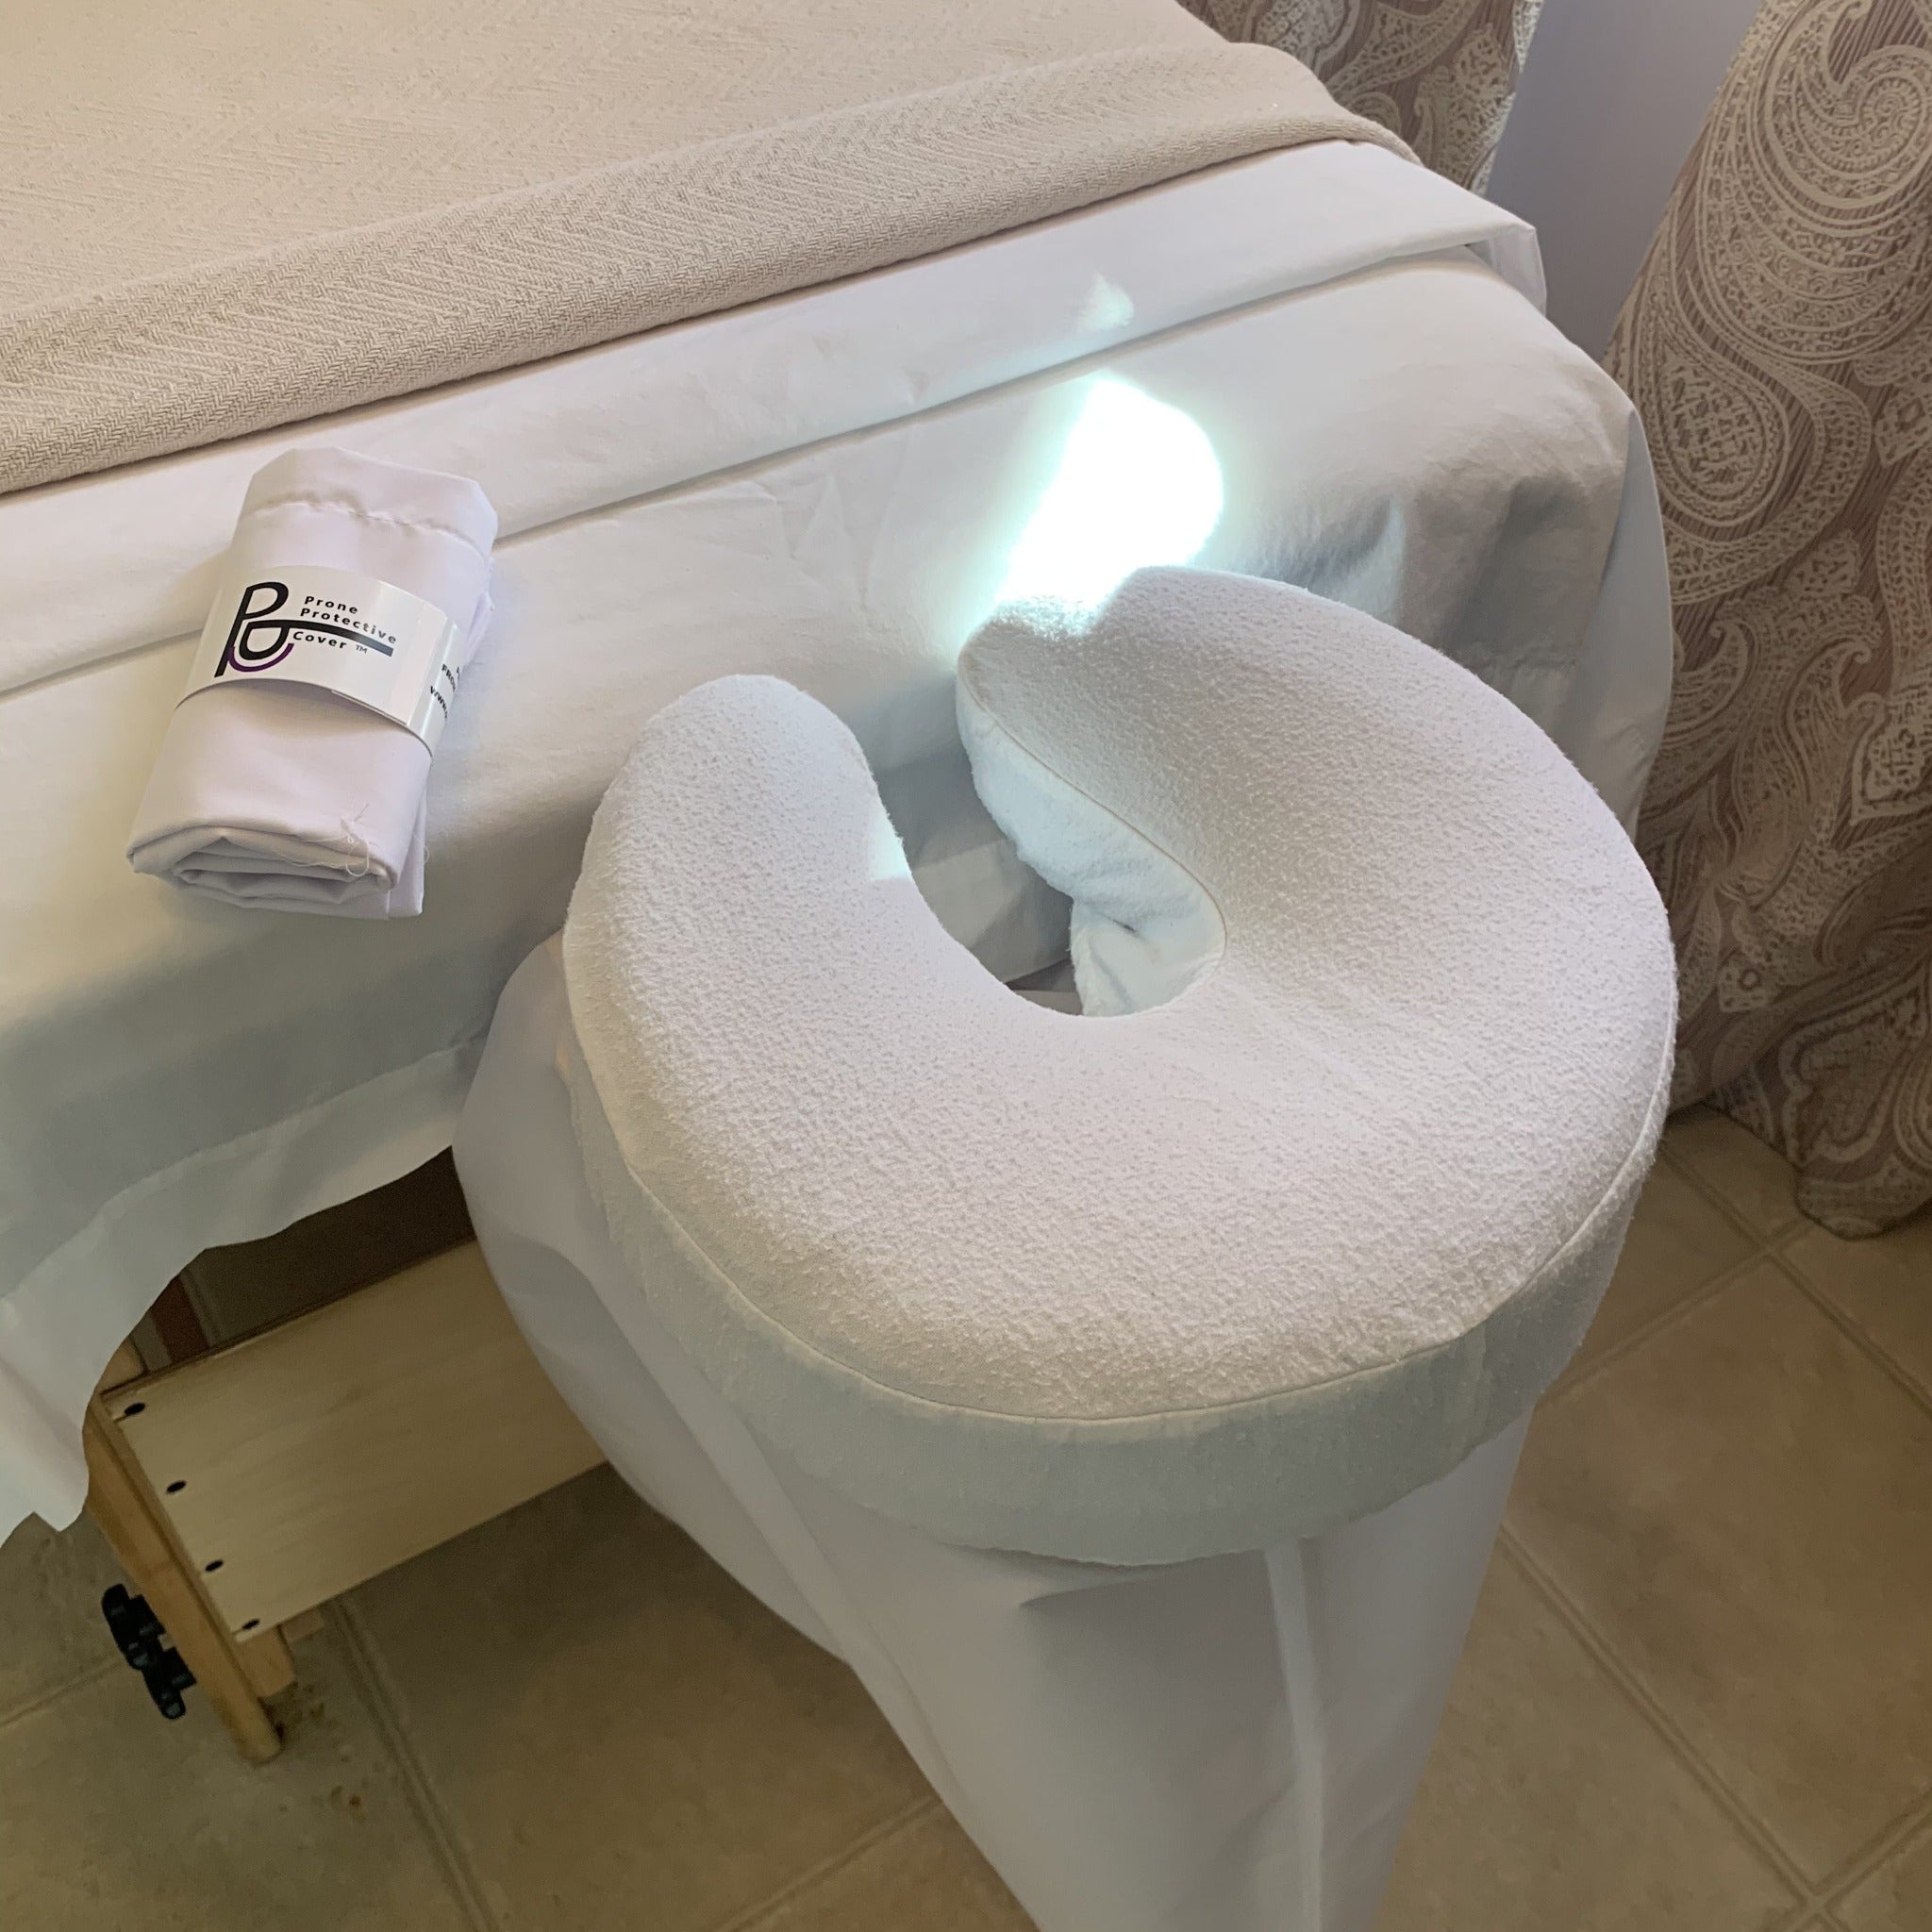 Prone Protective Cover for Clinic, Massage & Spa Tables tucks easily between Face Cushion and Platform.  Reduces feelings of claustrophobia for the client and reduces  &  spread of airborne droplets associated with COVID19.